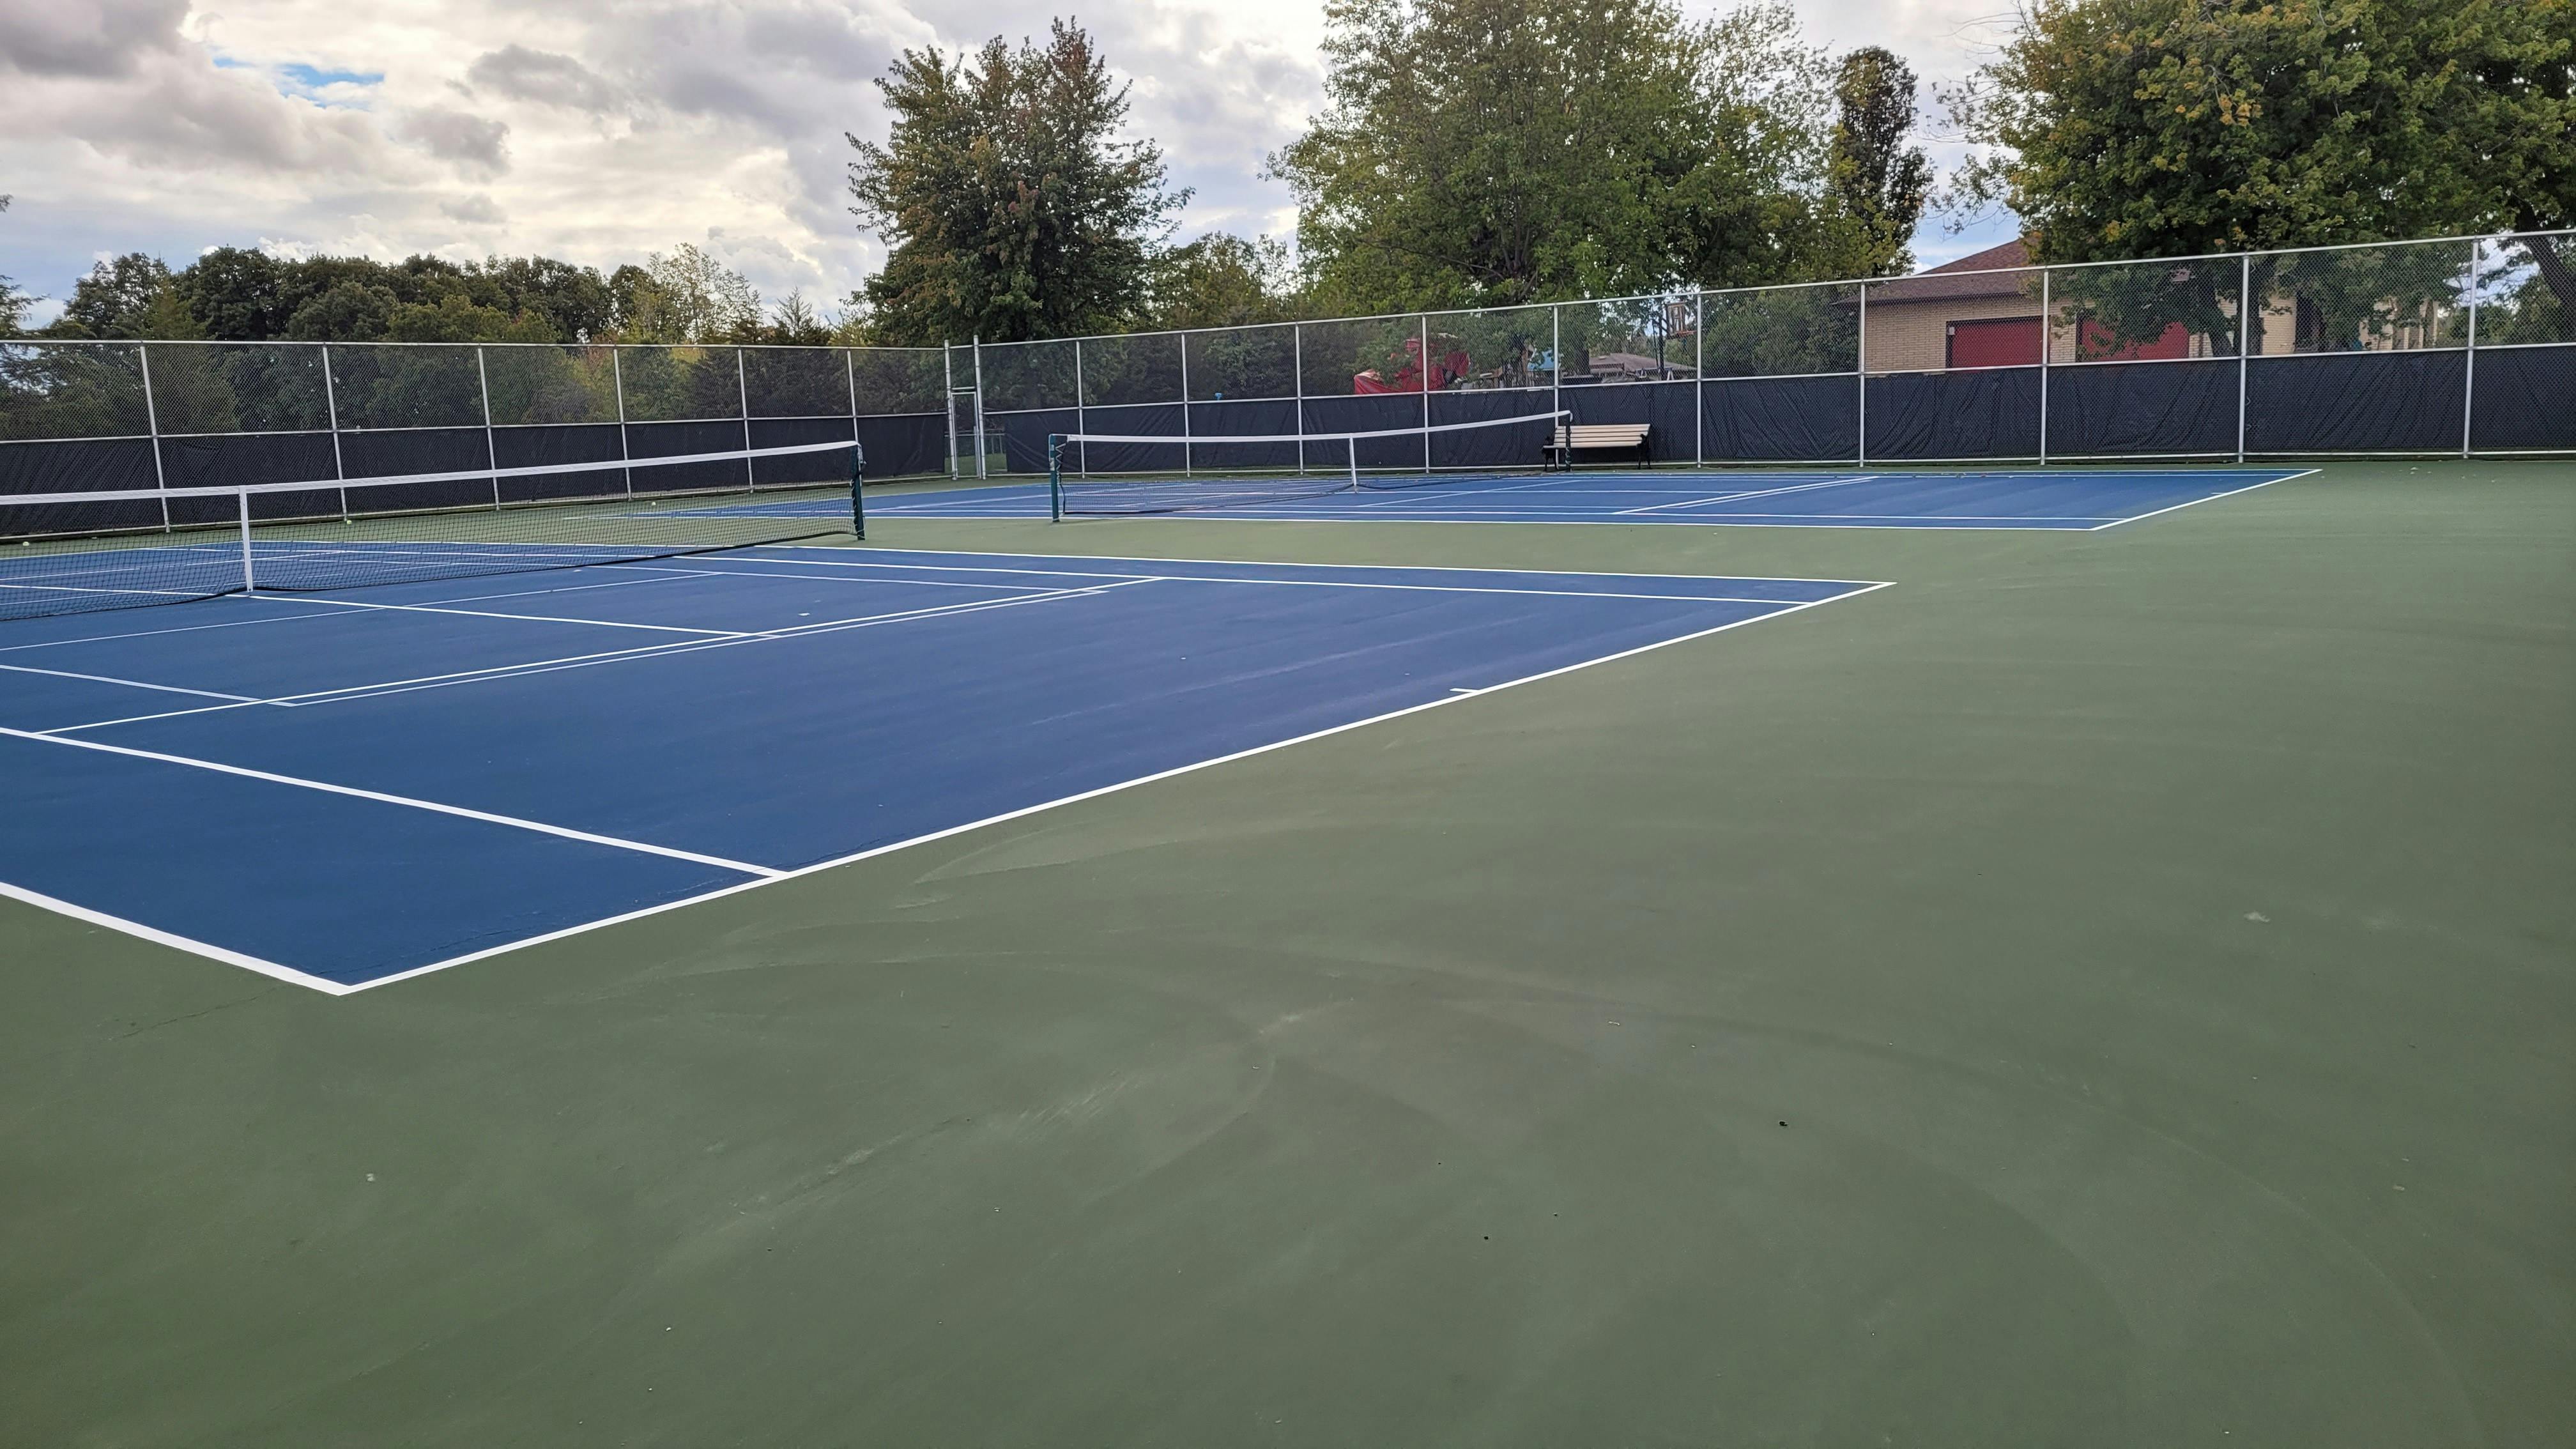 Existing tennis courts